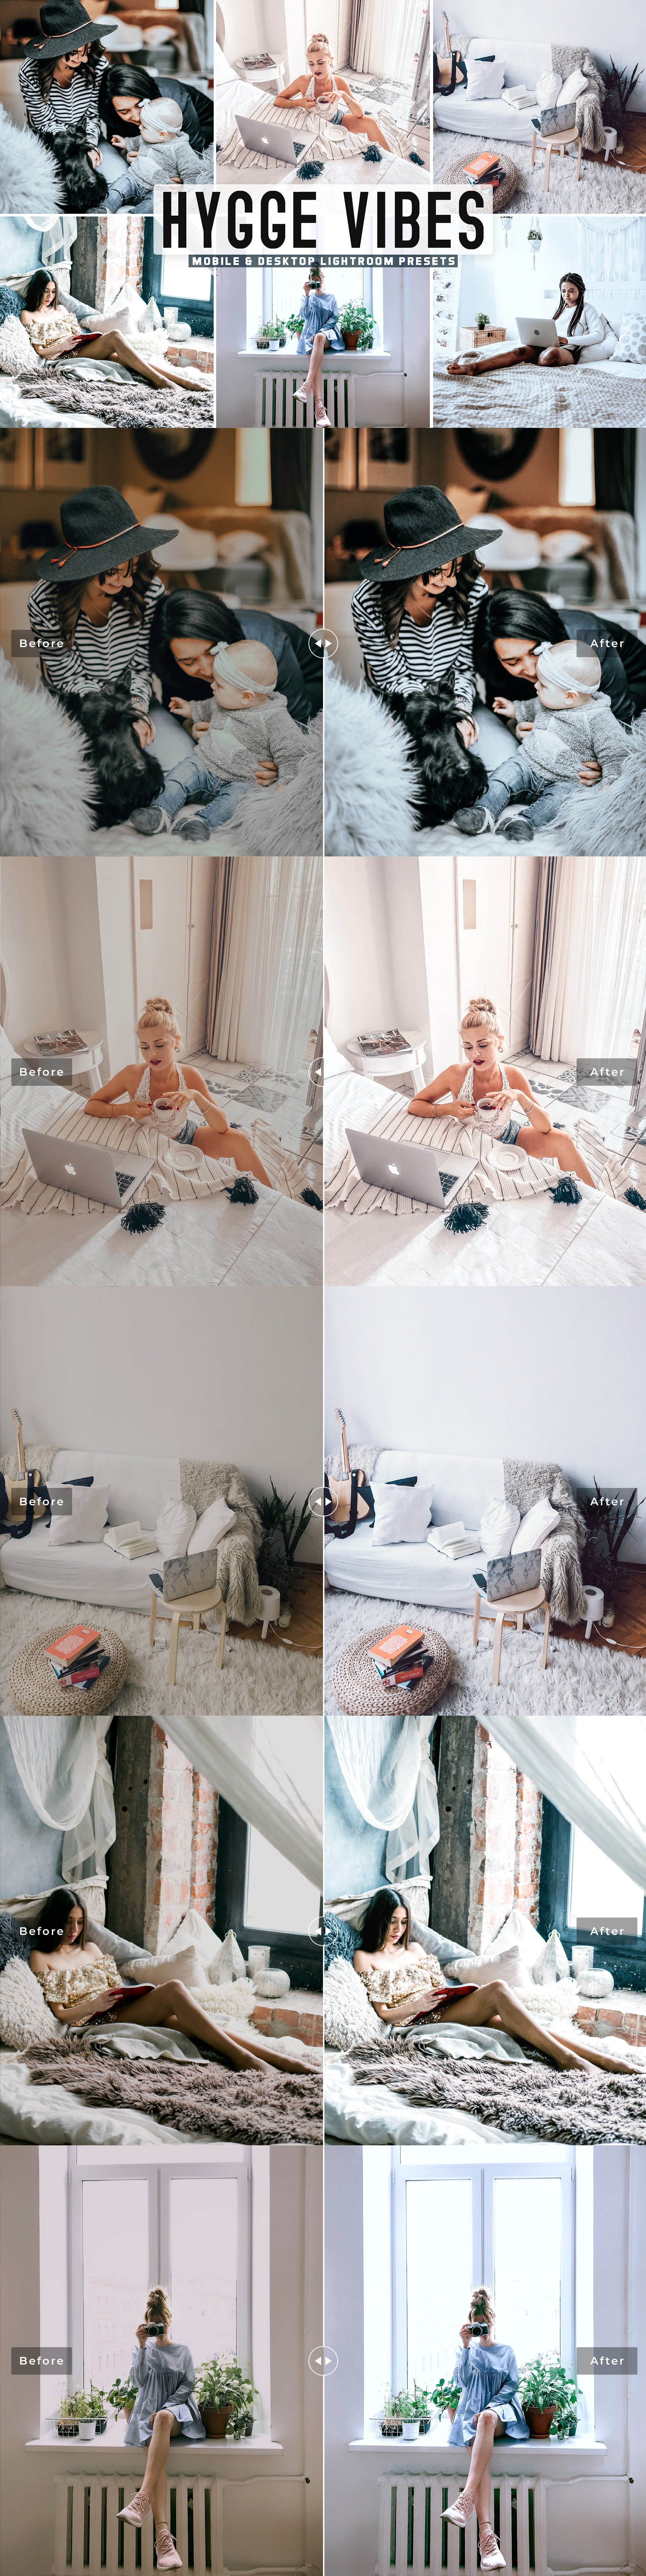 Hygge Vibes Pro Lightroom Presetscover image.